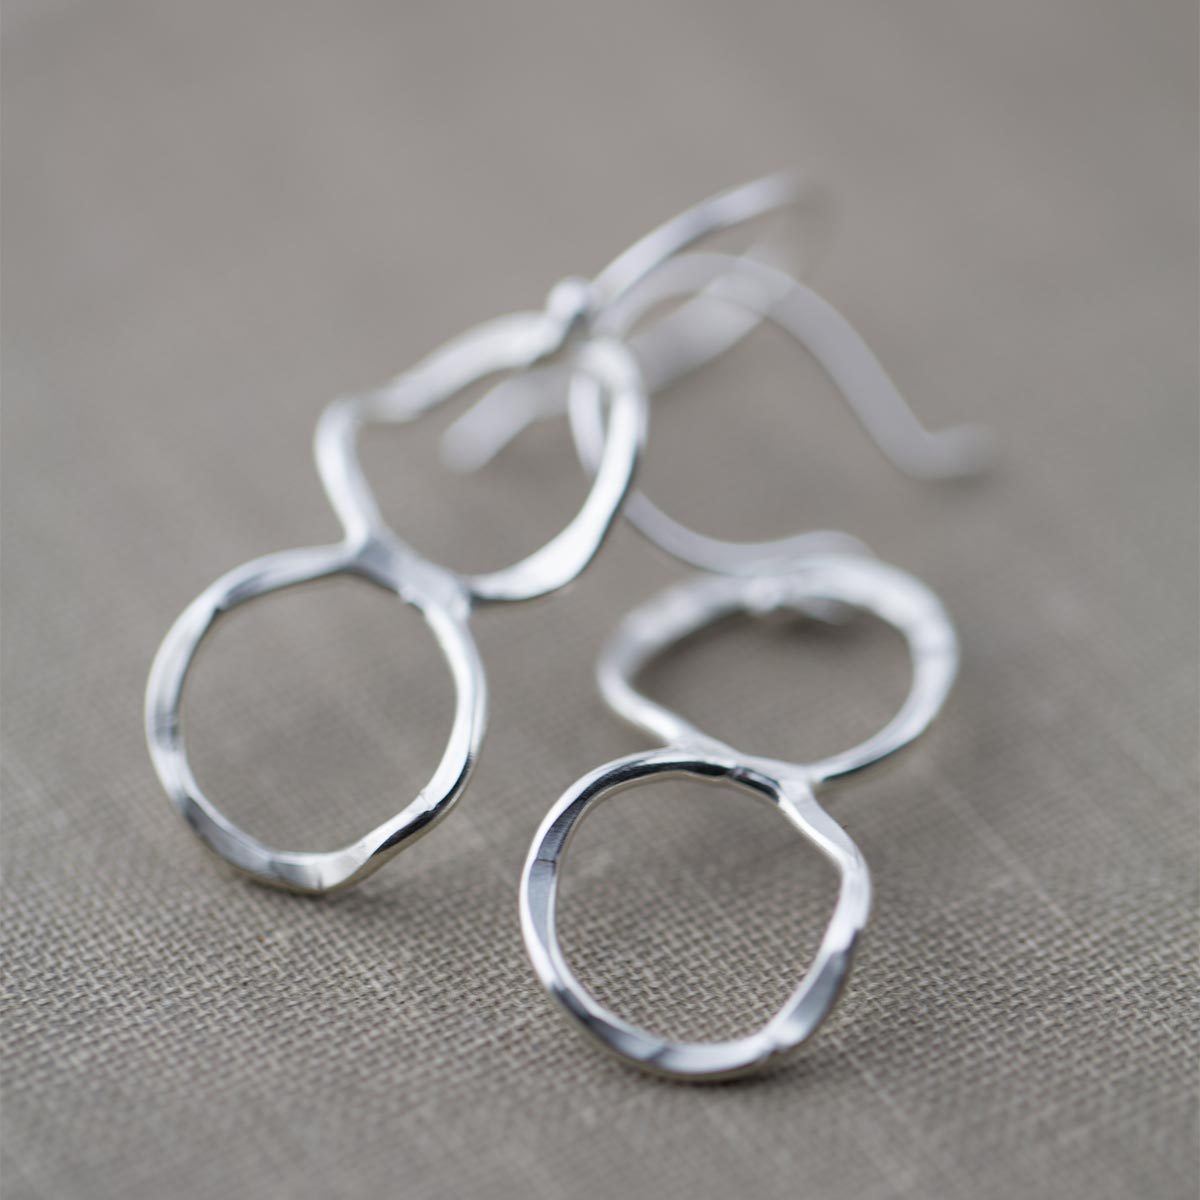 Double Circle Statement Earrings - Handmade Jewelry by Burnish